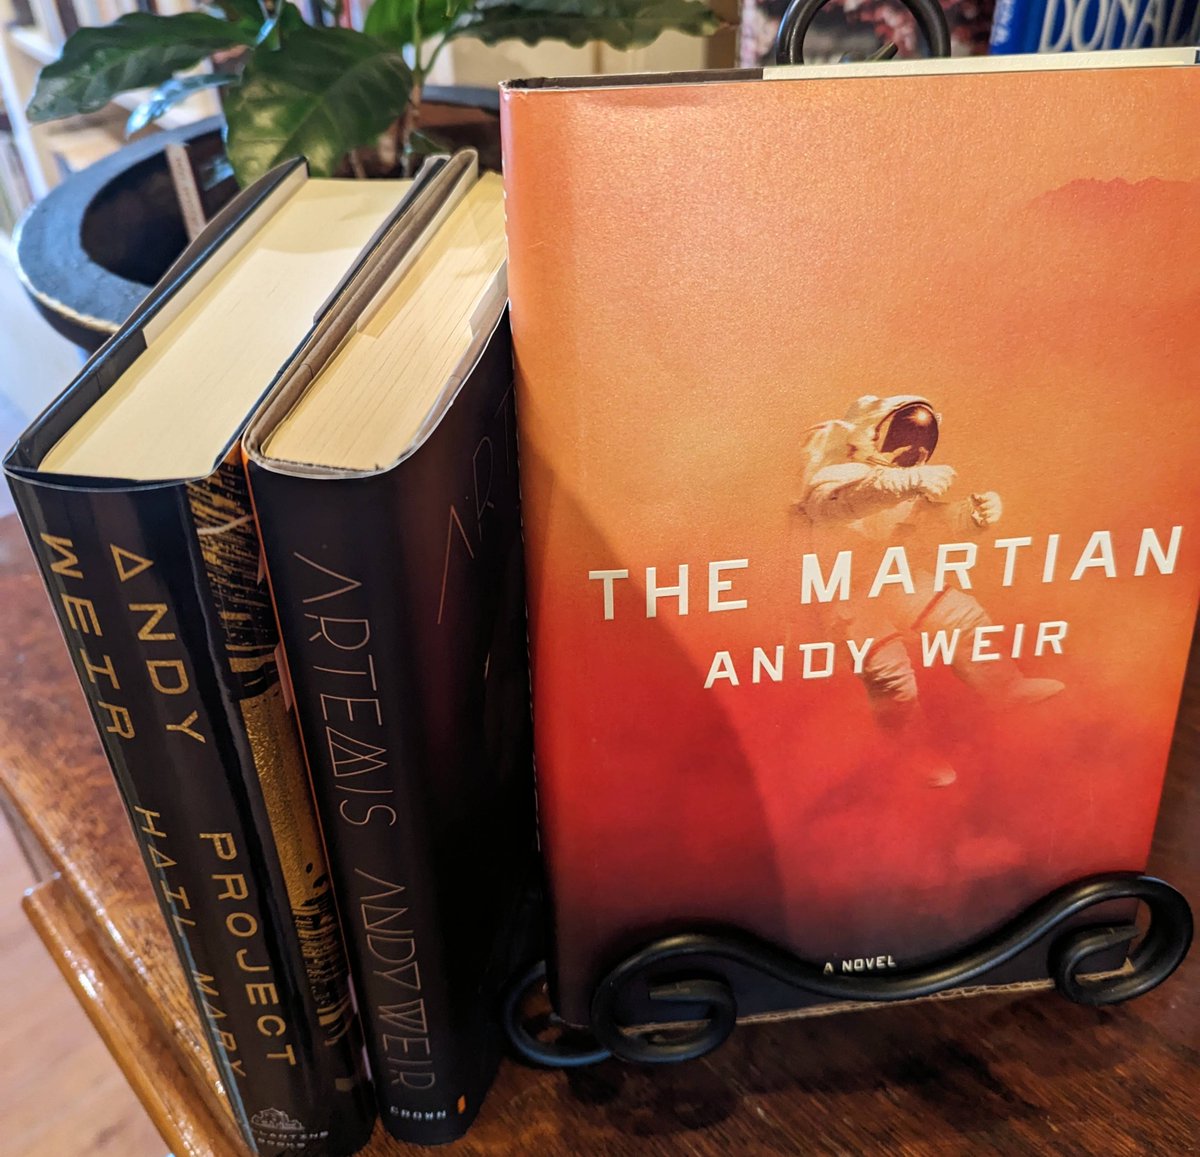 Looking for a thrilling new read? Andy Weir's sci-fi, adventure books will take you to space!